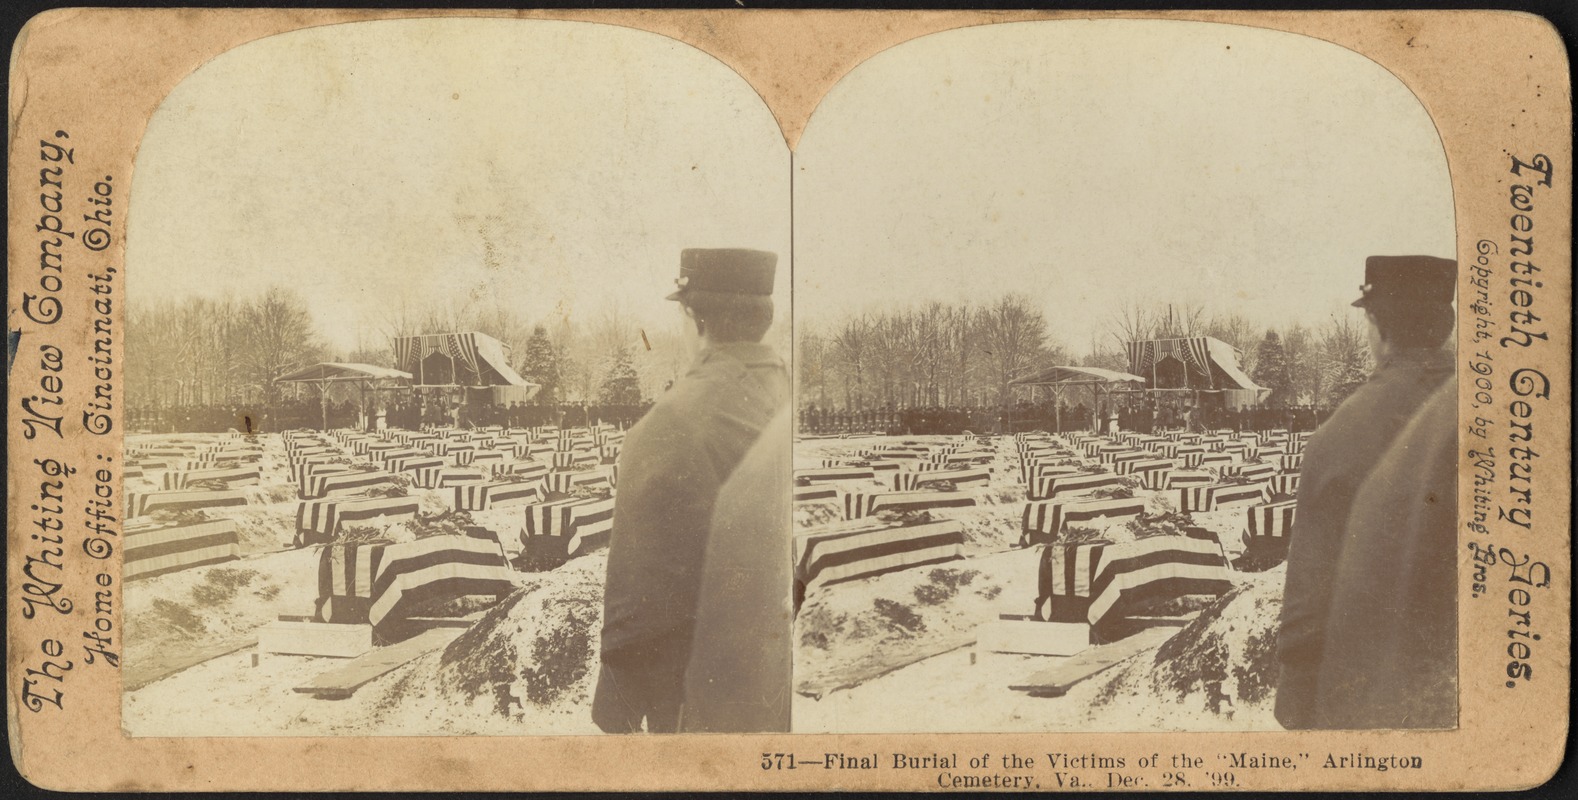 Final burial of the victims of the "Maine," Arlington Cemetery, Va. Dec. 28, '99